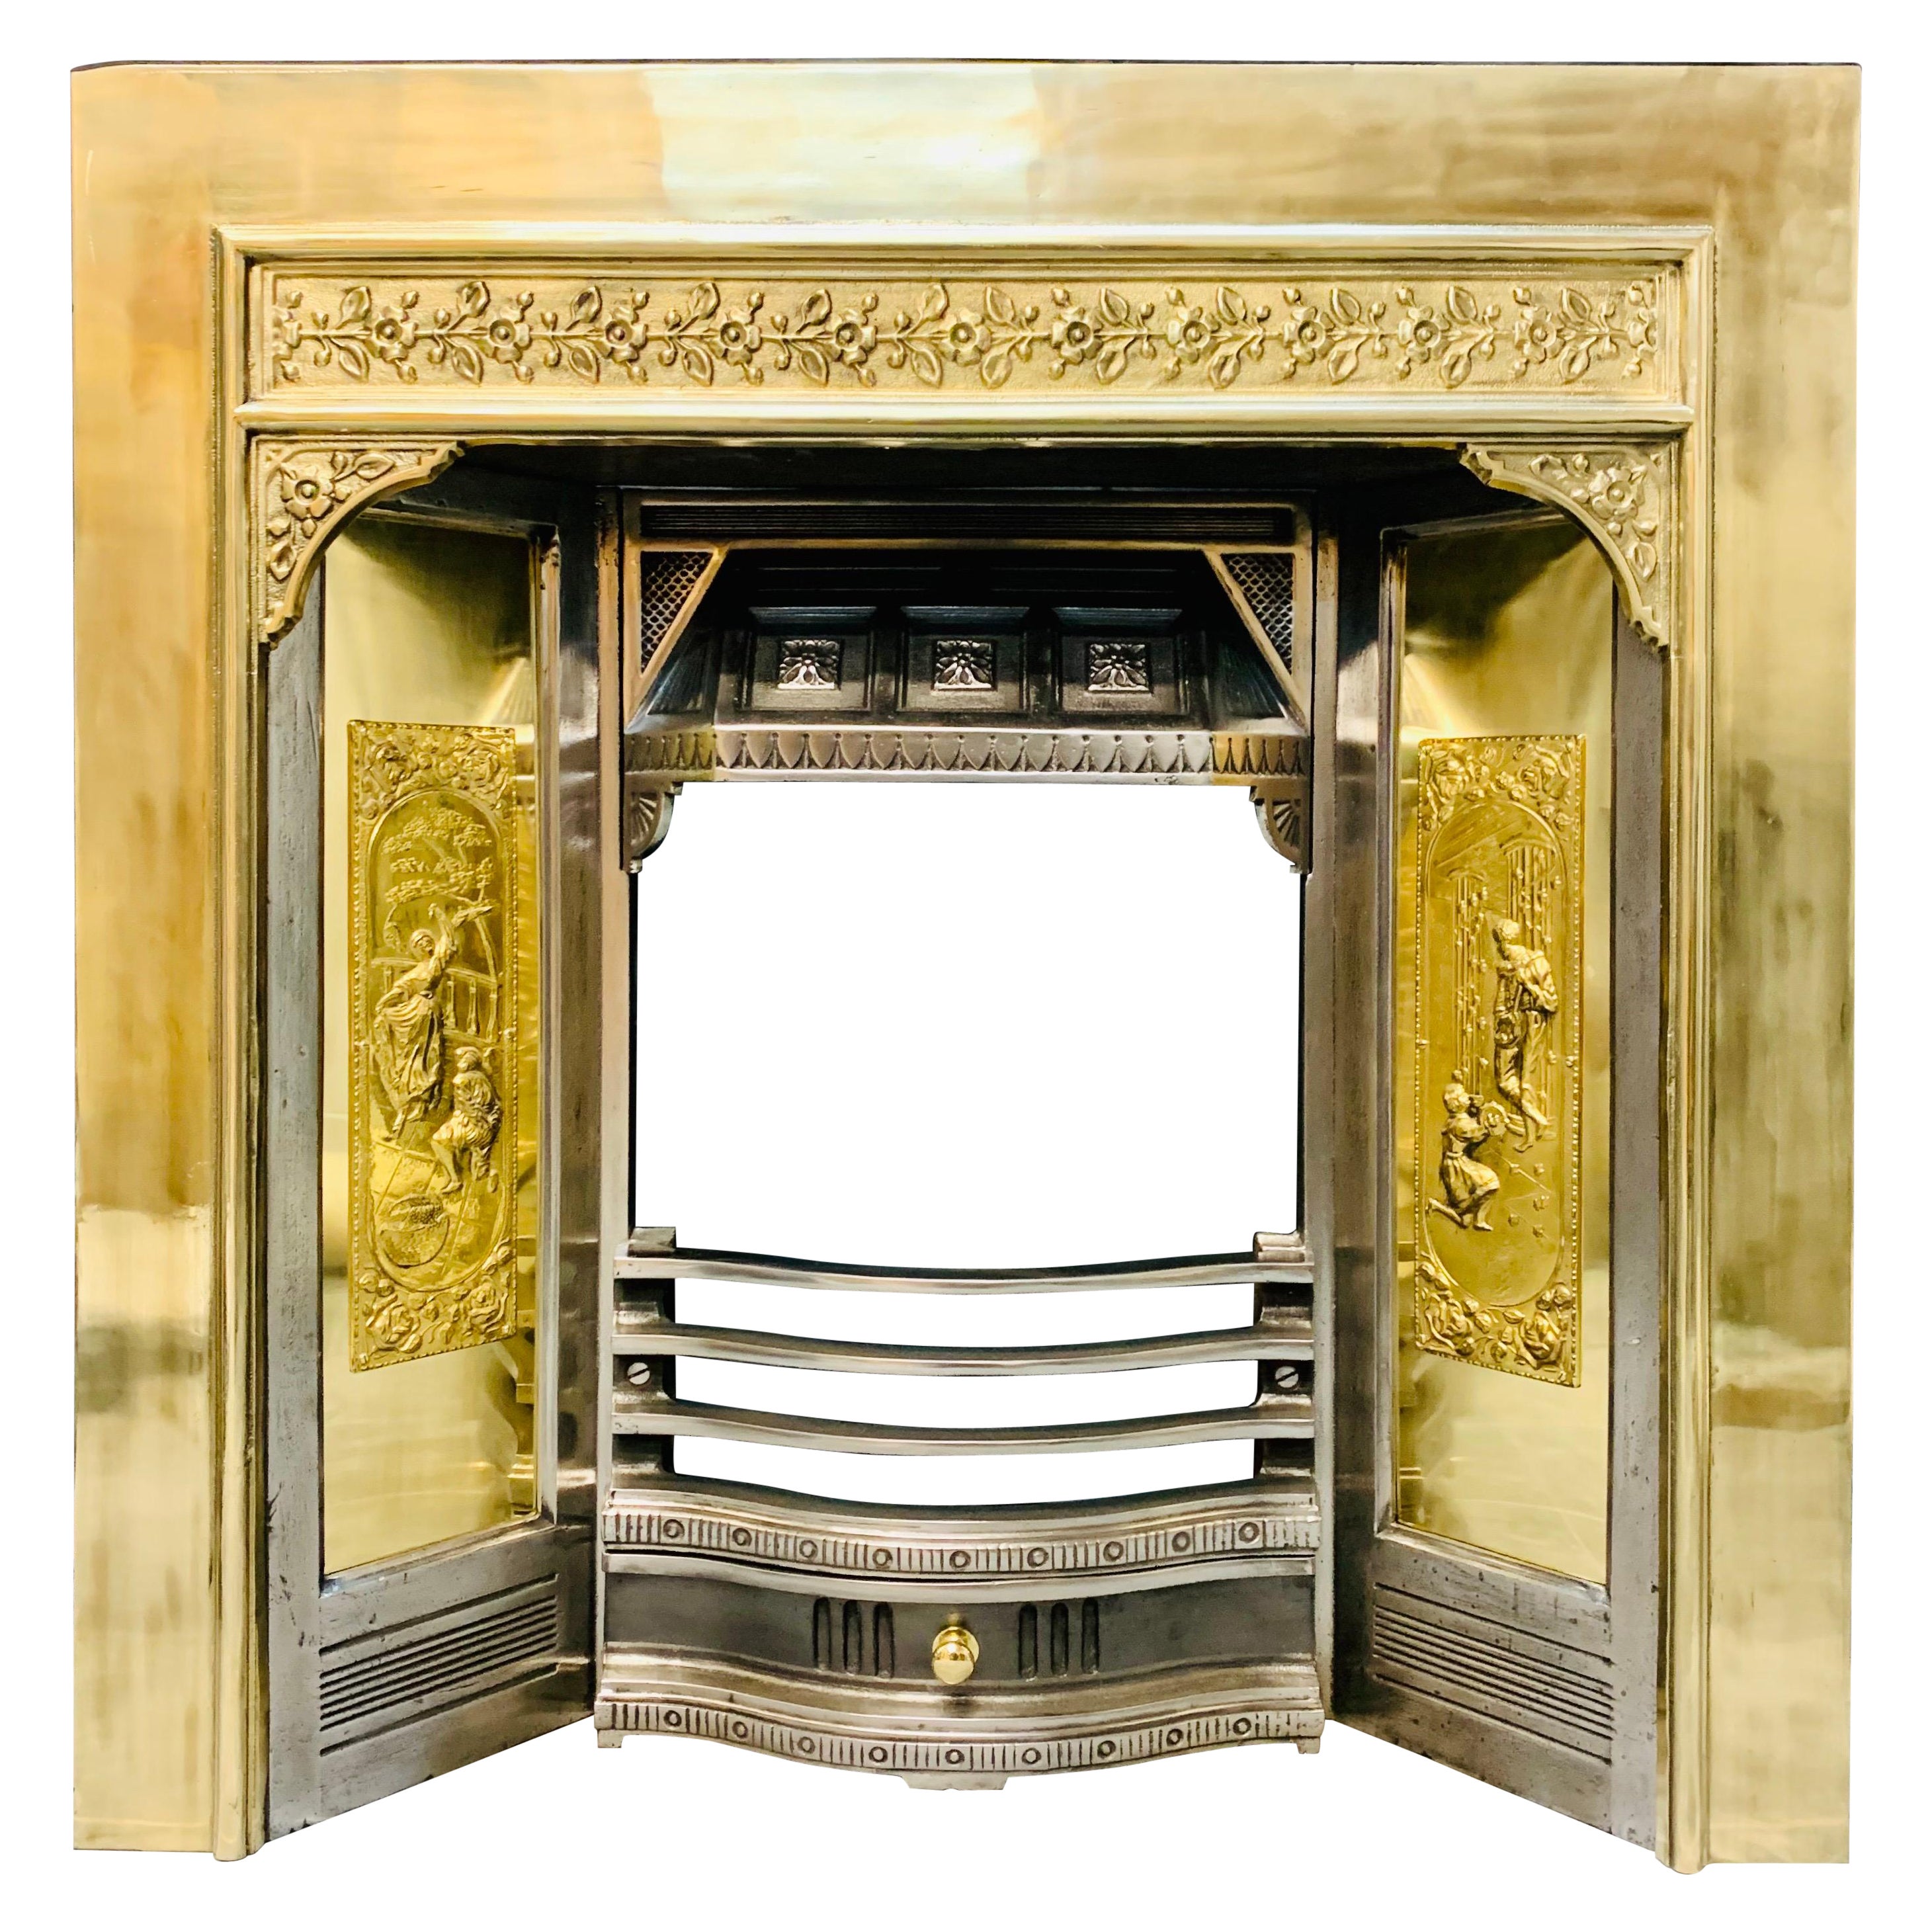 19th Century Manner Polished Brass & Steel Fireplace Insert